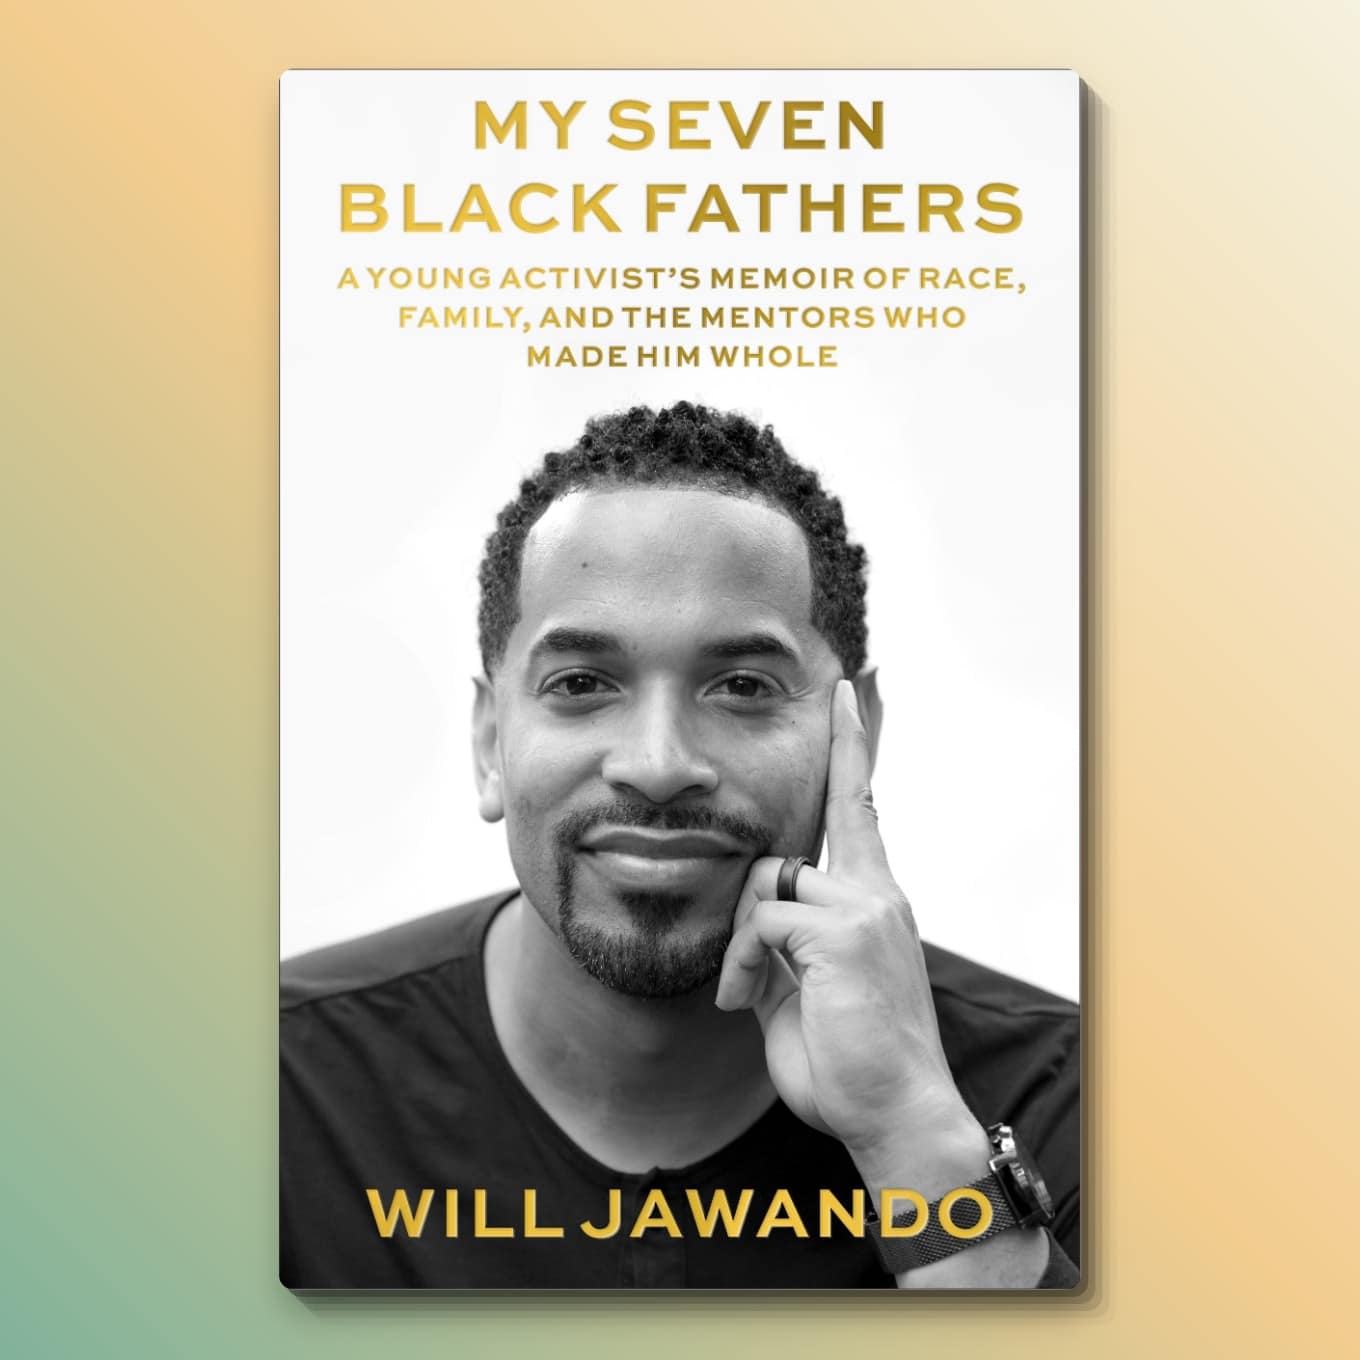 “My Seven Black Fathers: A Young Activist’s Memoir of Race, Family, and the Mentors Who Made Him Whole” by Will Jawando